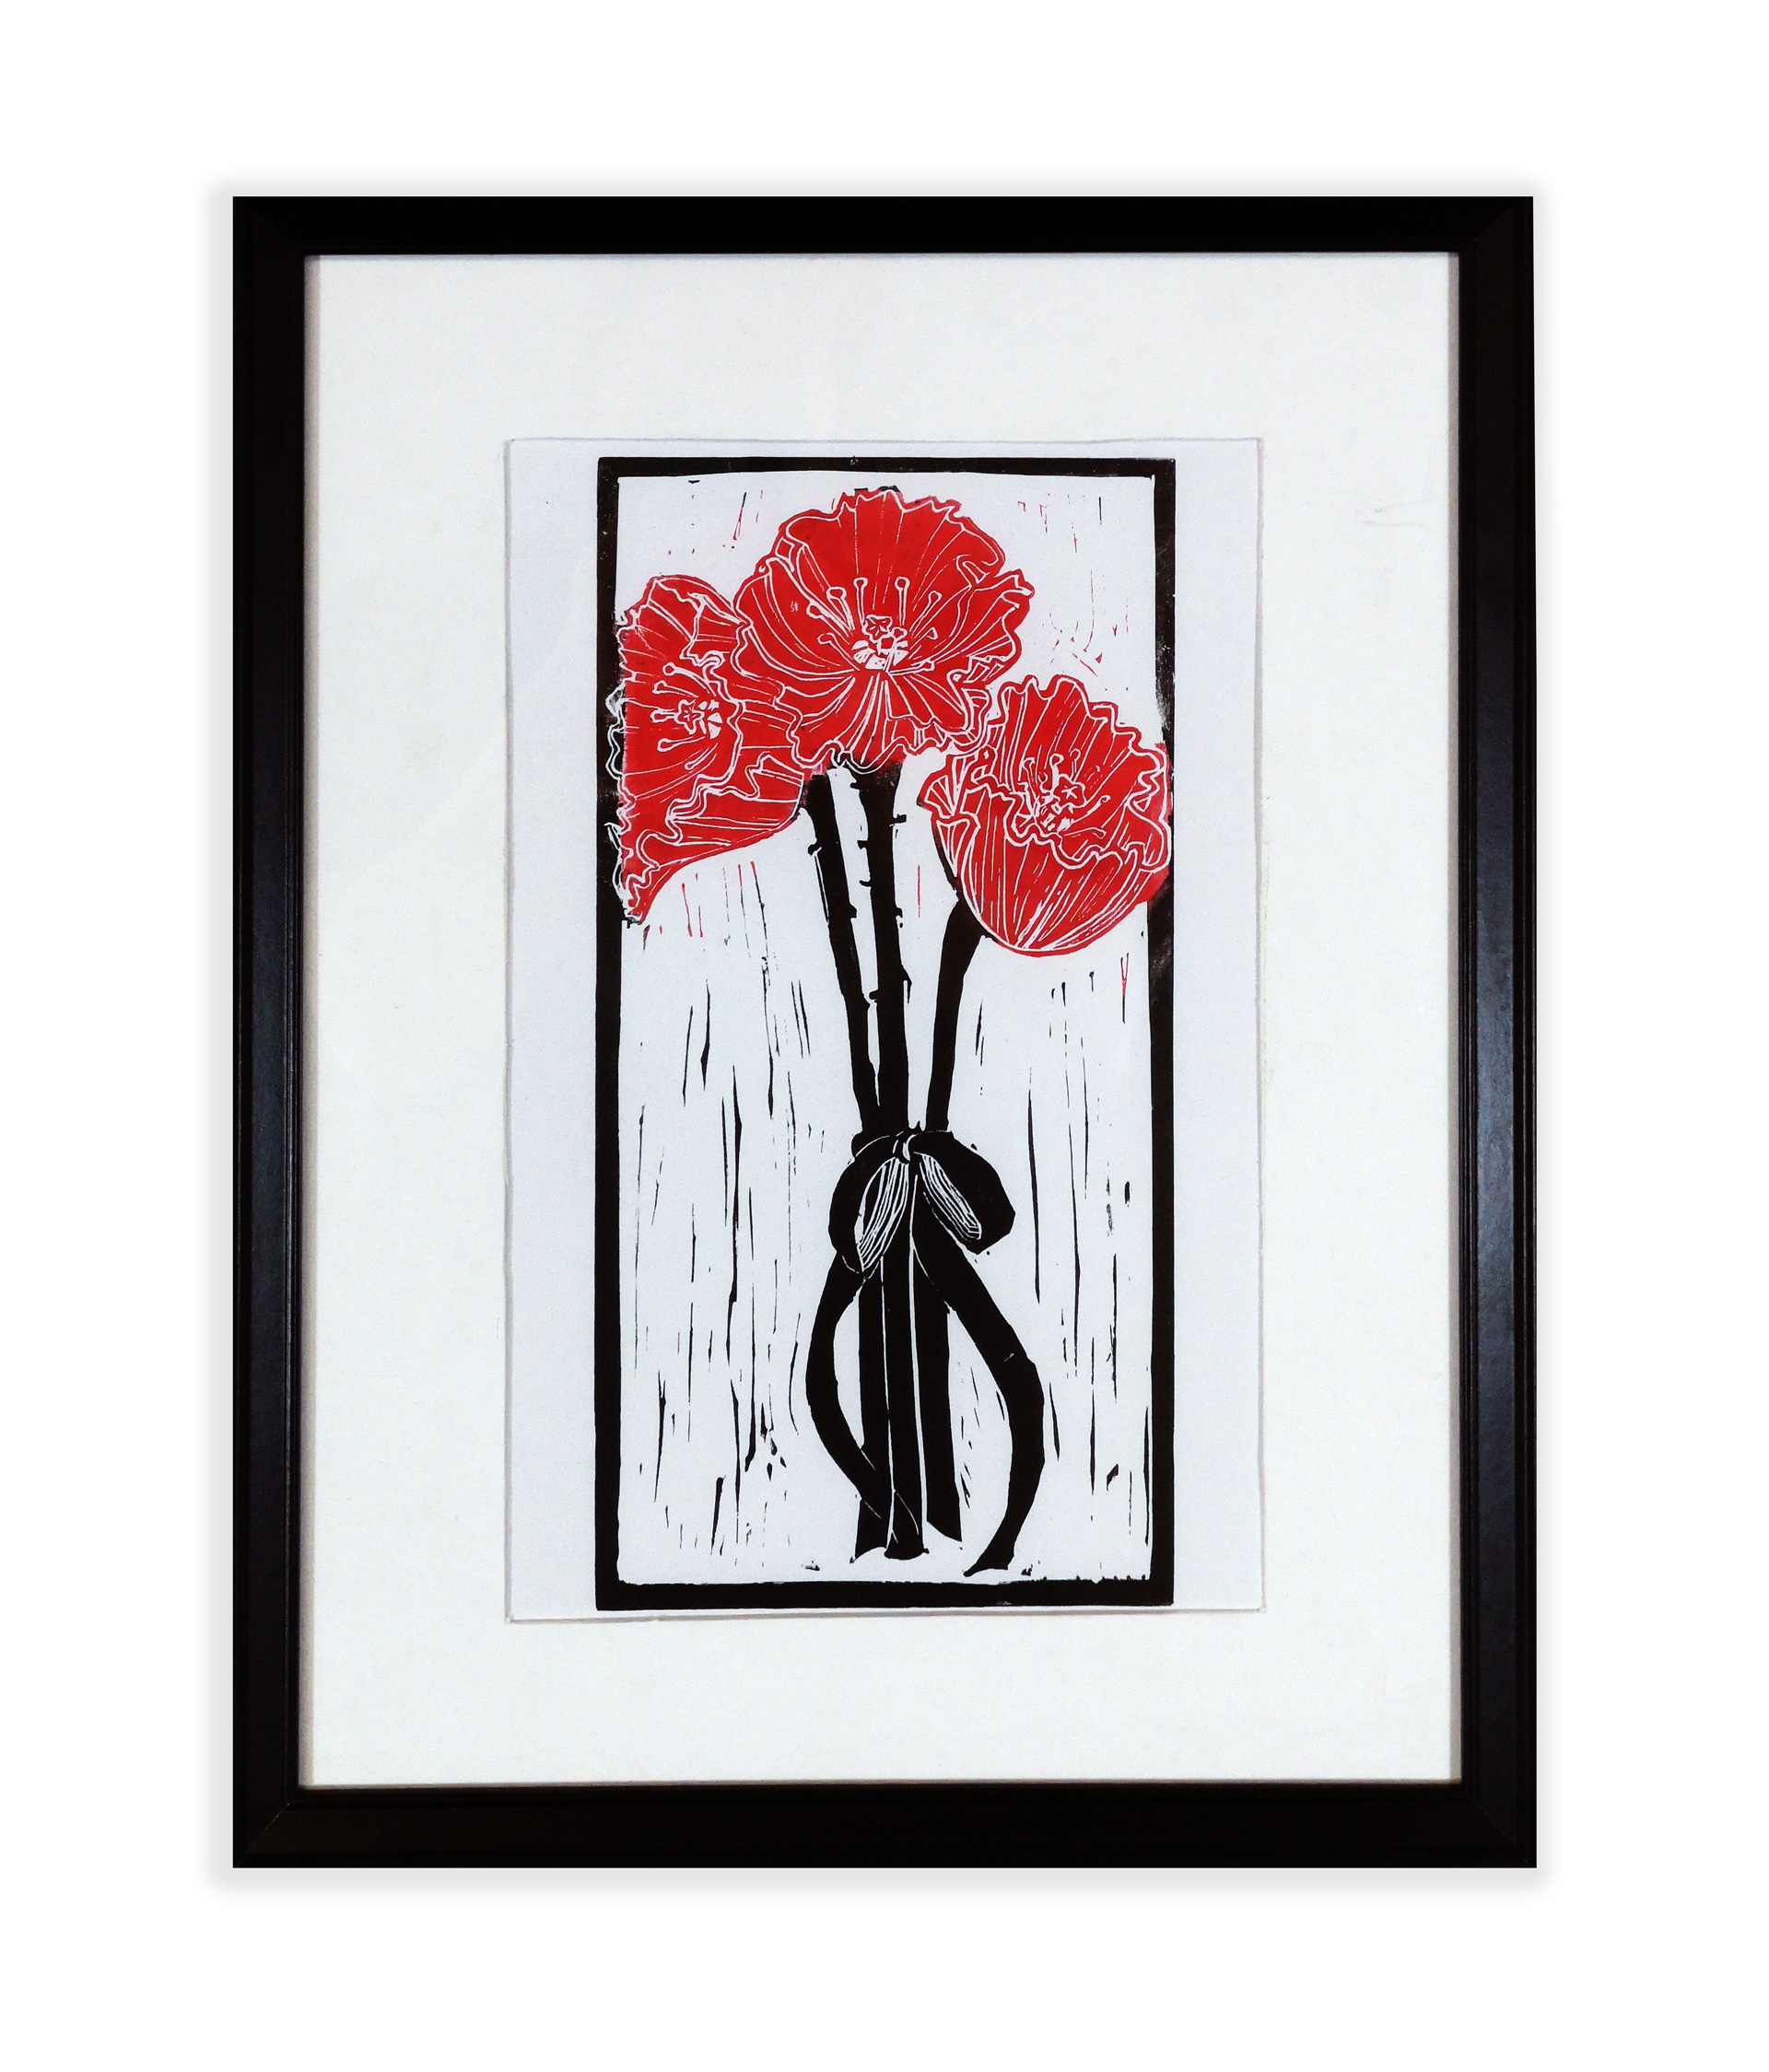 A linocut of red poppies with long black stems tied in a black ribbon